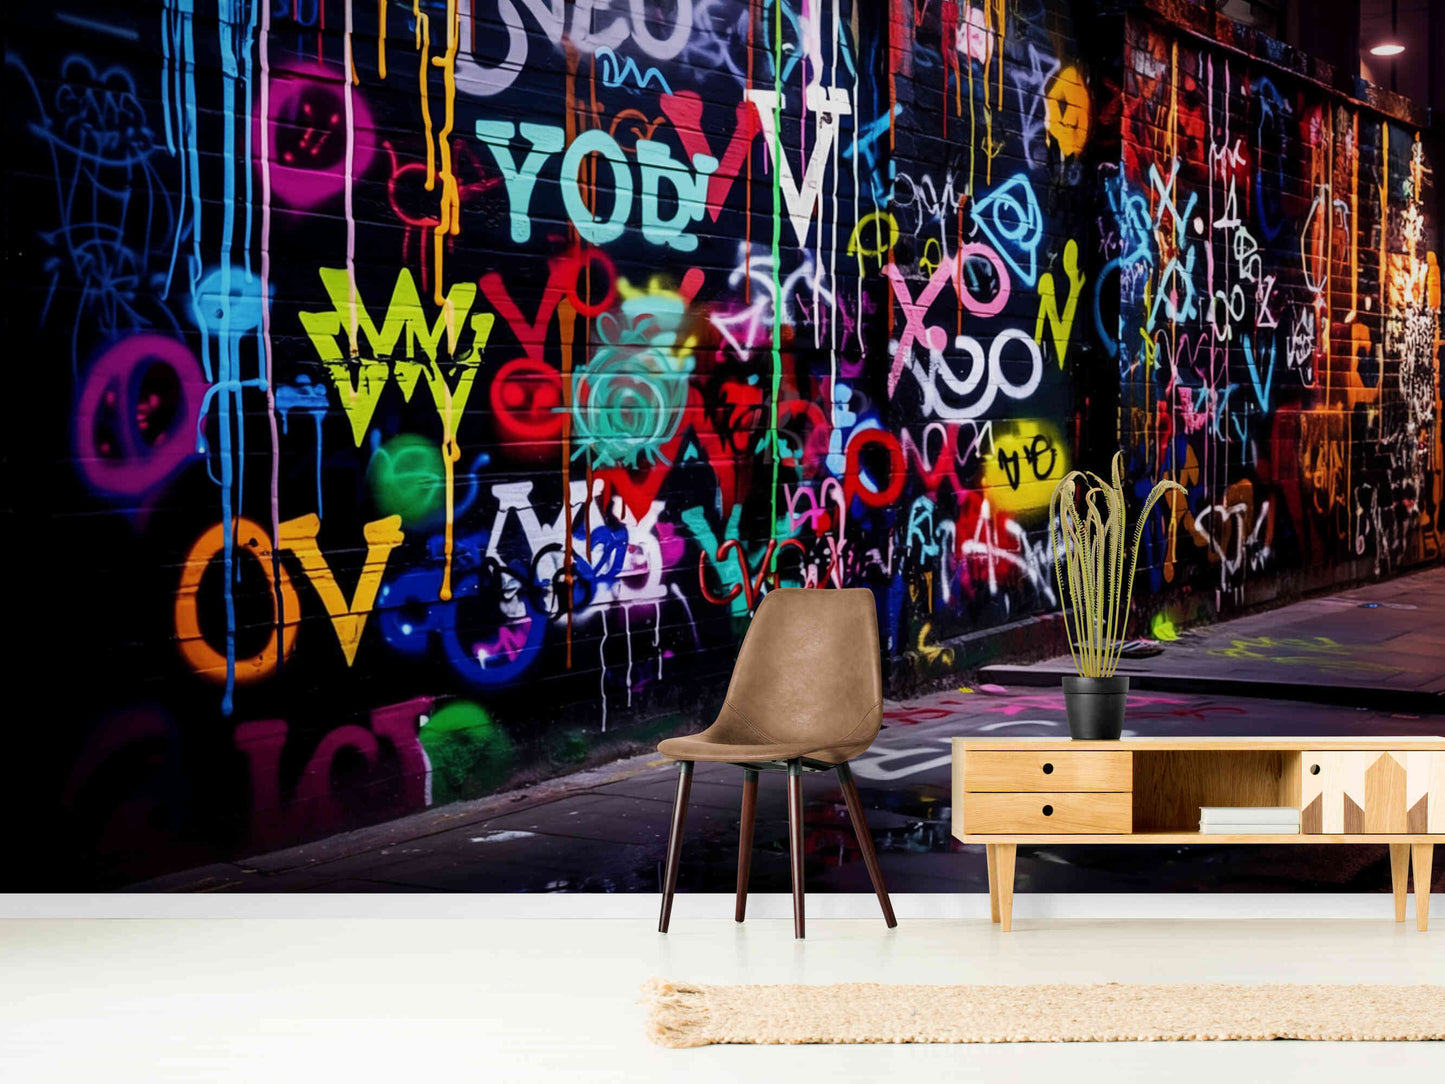 Urban artistry meets neon brilliance in this graffiti wall mural, lighting up spaces with dynamic colors.